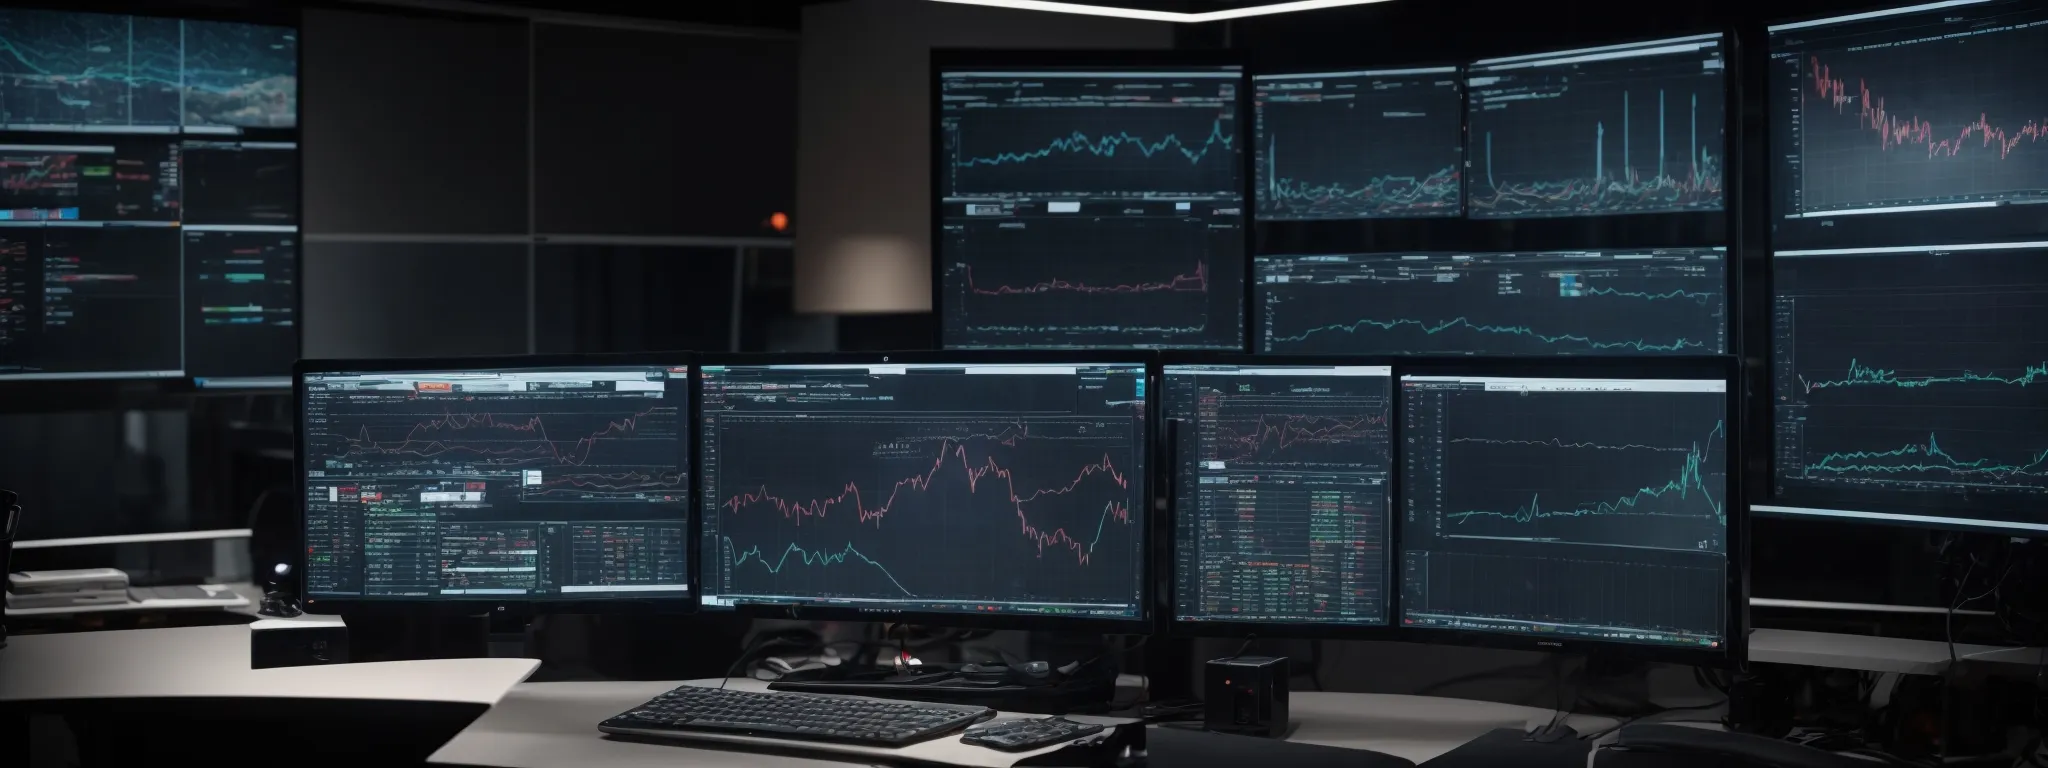 a sophisticated command center with multiple monitors displaying graphs and data analysis in real-time.